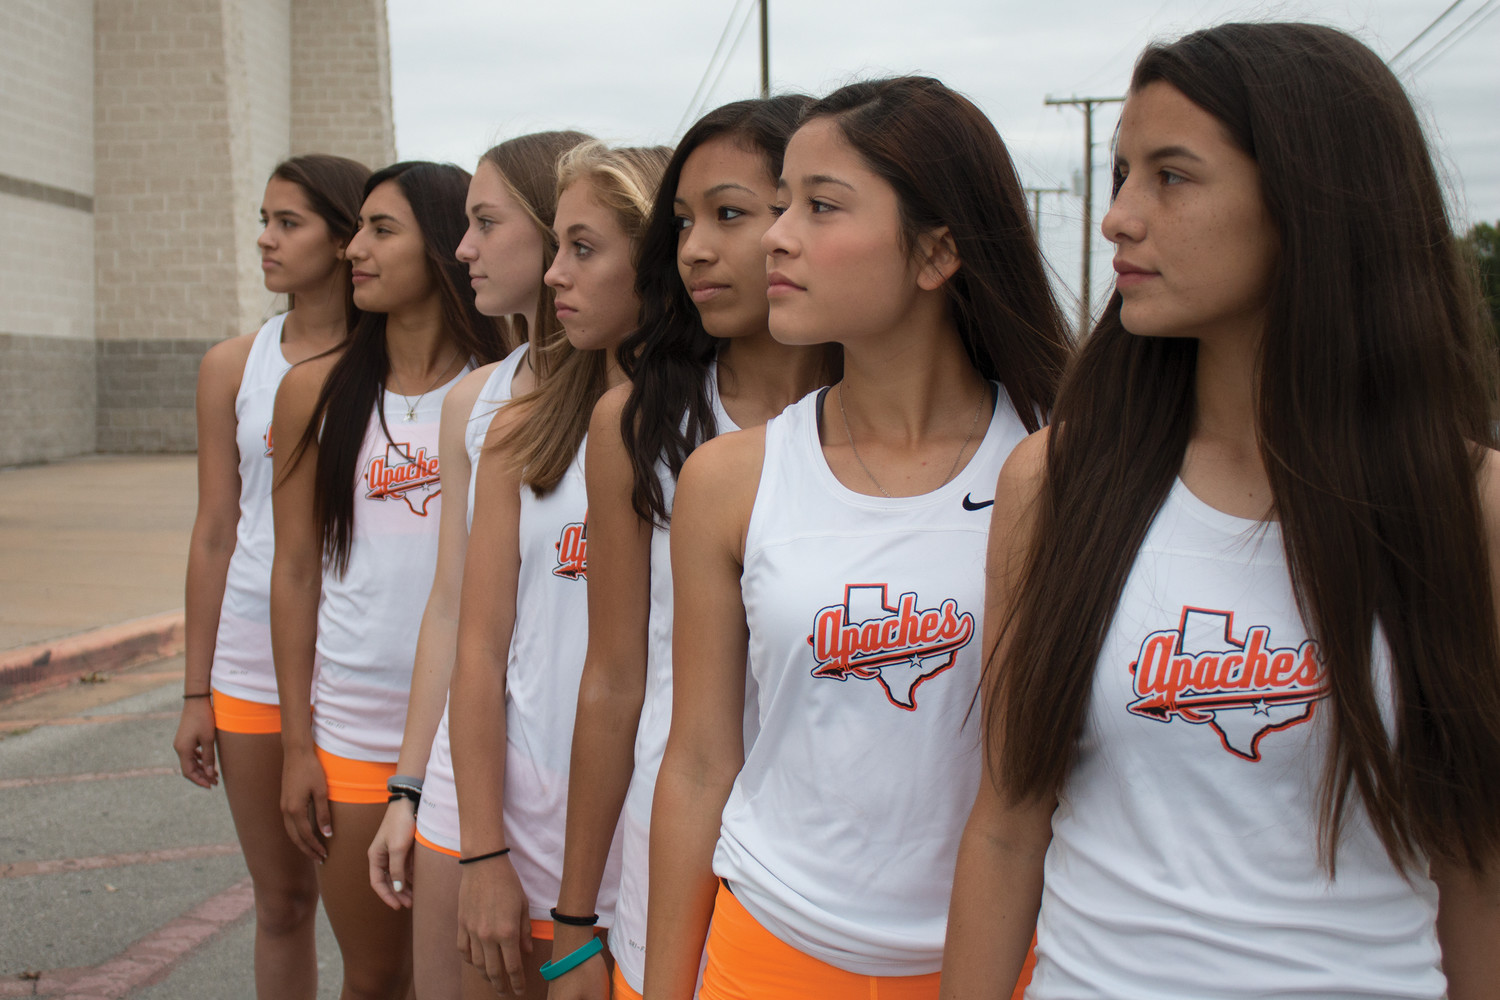 GONZALES:
The Gonzales Lady Apaches cross-country team reached new heights, winning their district race for the second year in a row, taking third in the Region IV-4A race and then placing seventh as a team in the state meet.